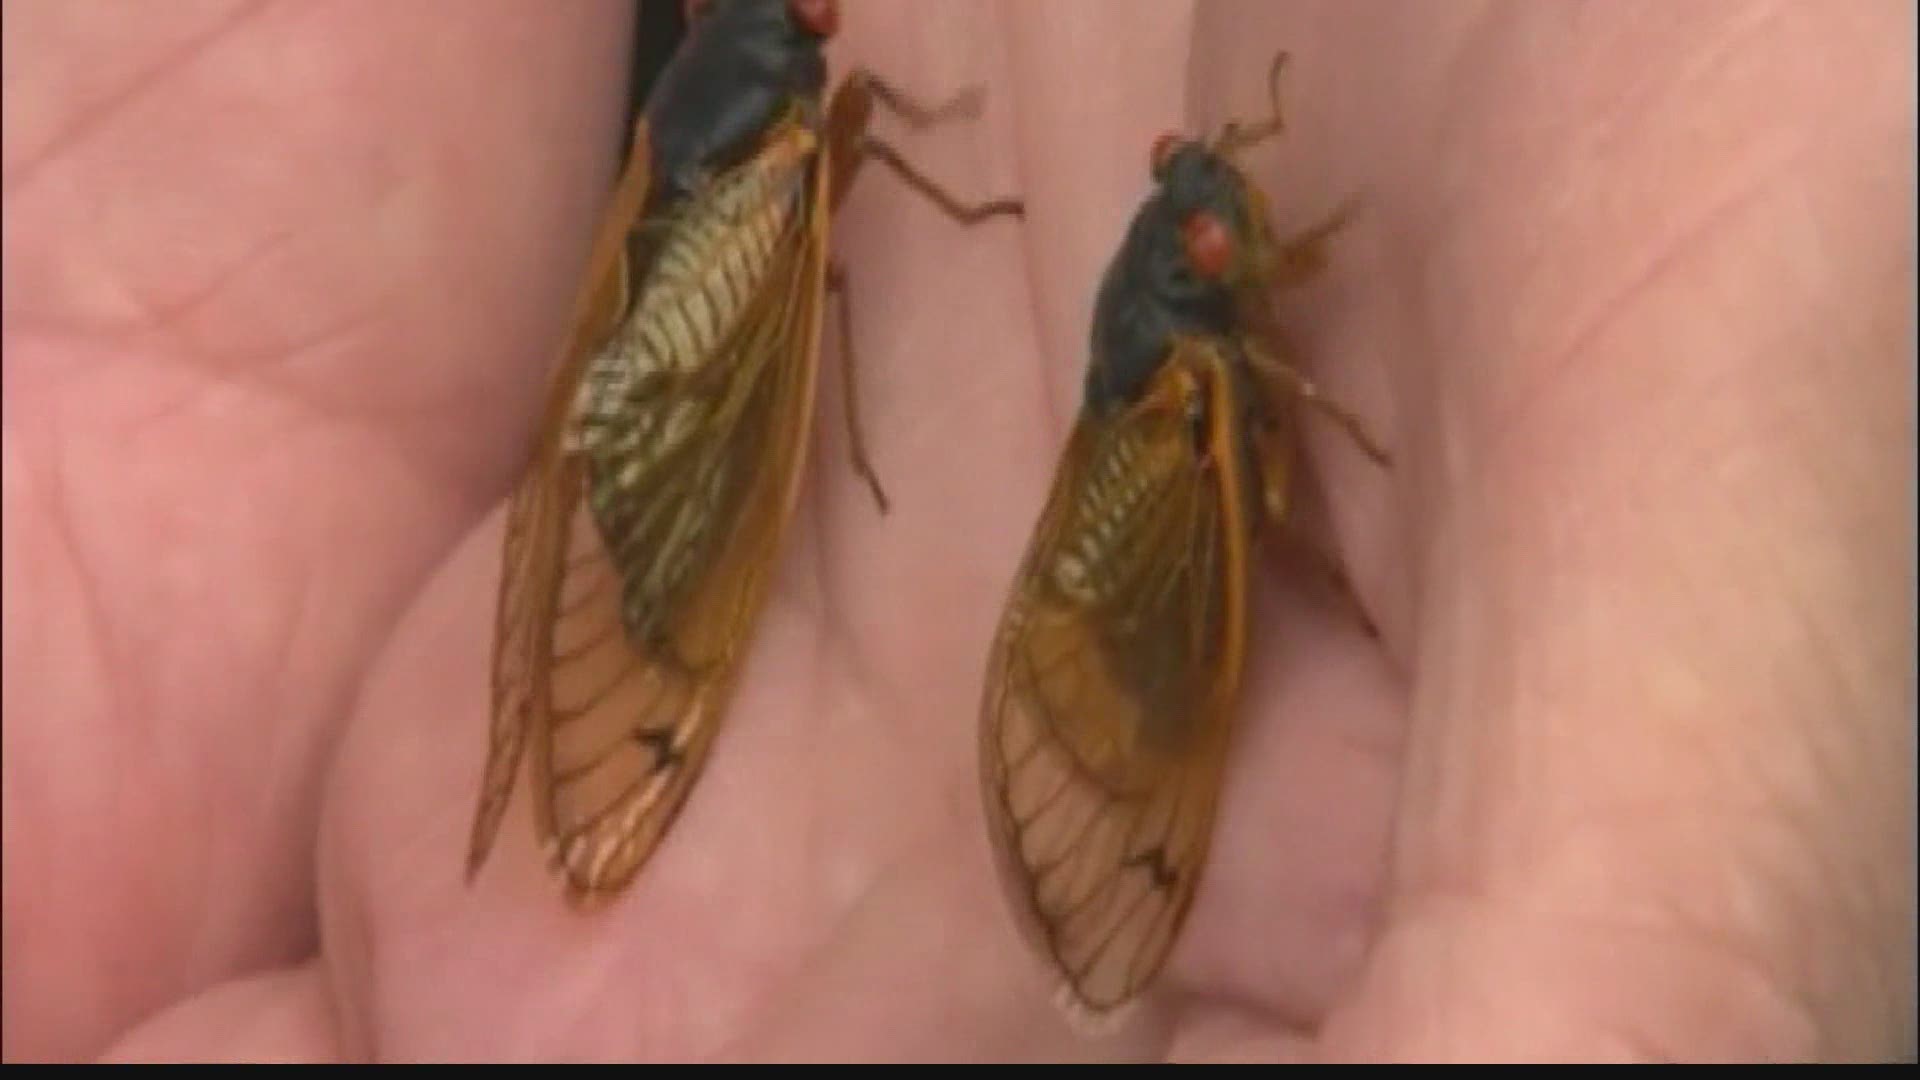 There's been a lot of talk recently about the invasion of "brood x cicadas" this year!